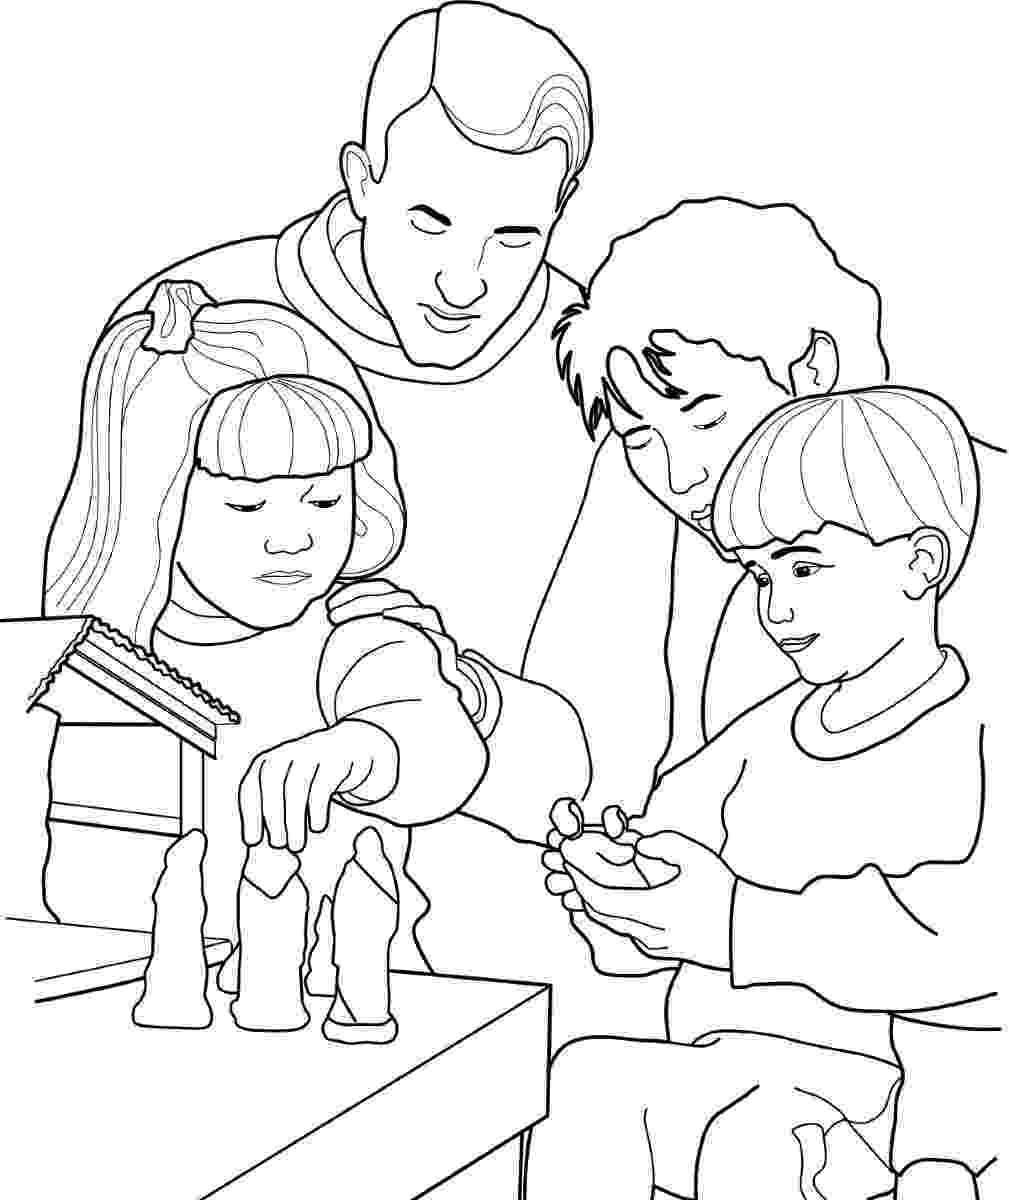 primary coloring pages primary lds lesson ideas page 11 primary pages coloring 